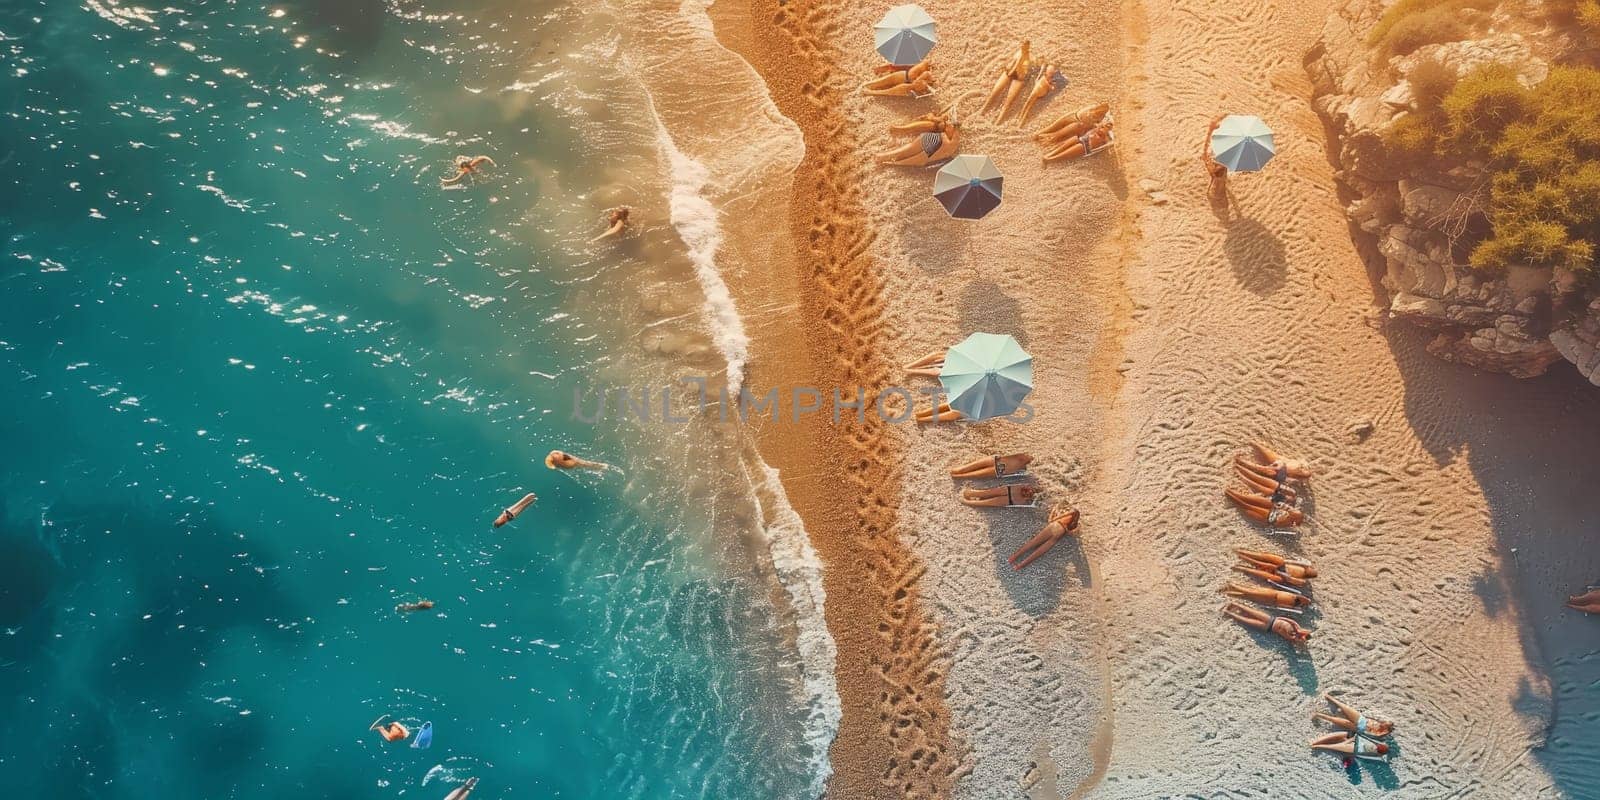 A beach scene with many people and umbrellas. Scene is relaxed and fun